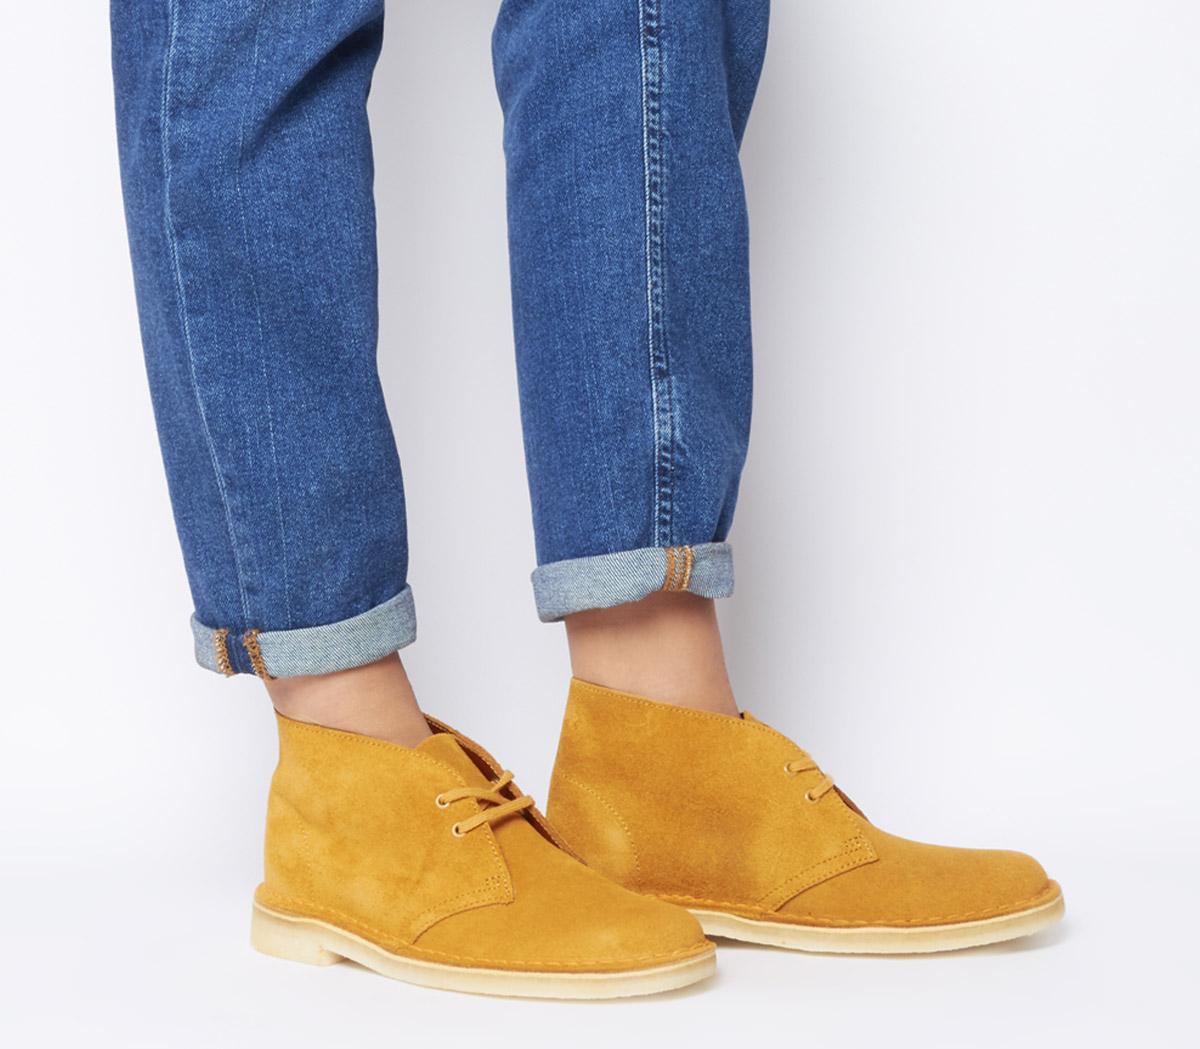 clarks blue suede ankle boots